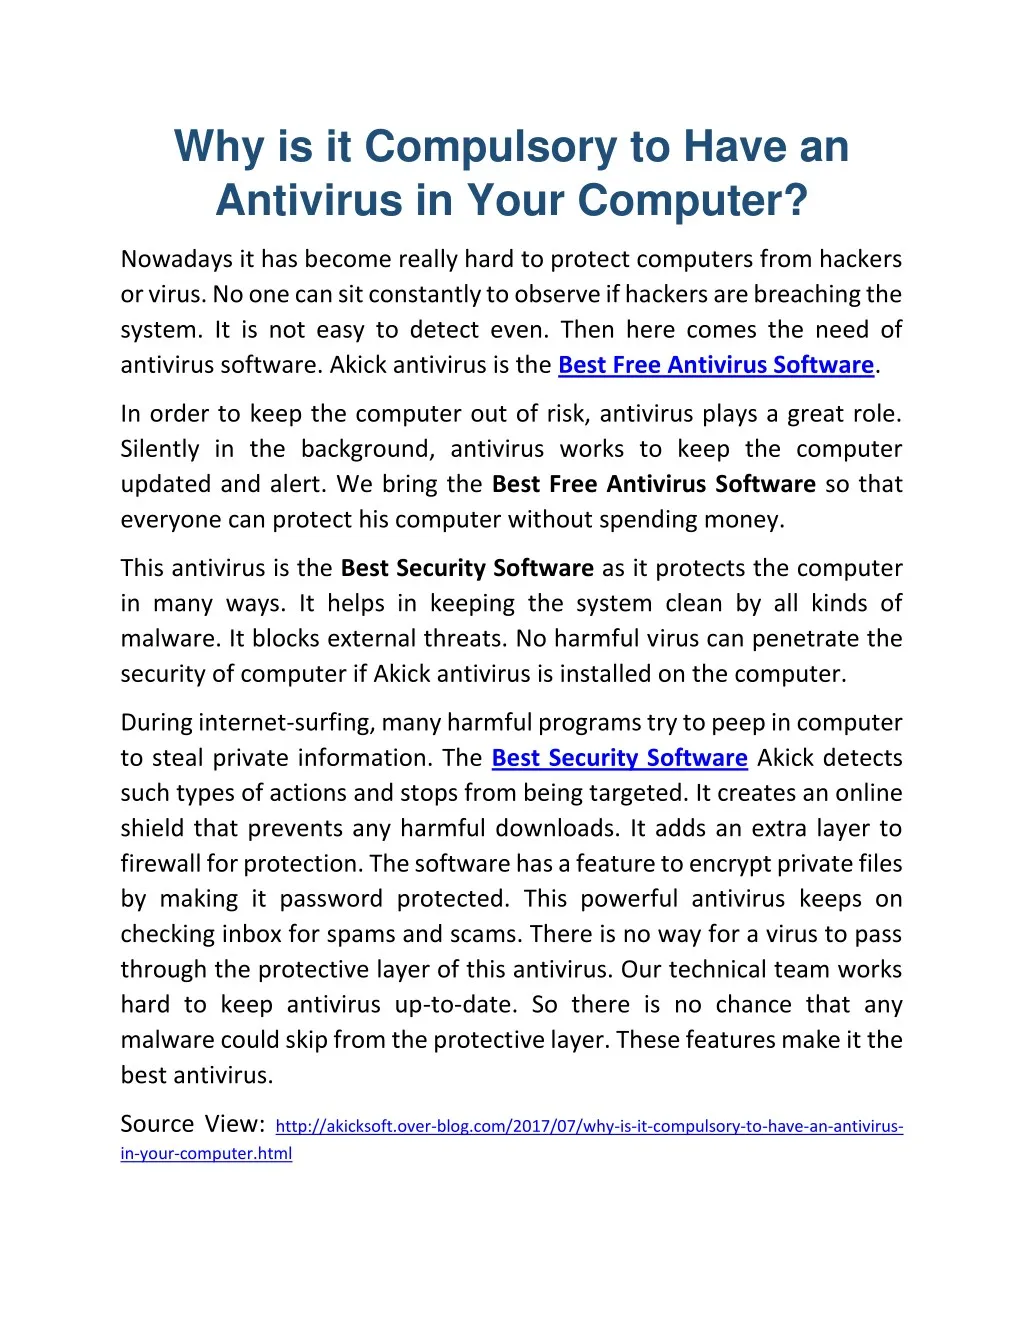 why is it compulsory to have an antivirus in your